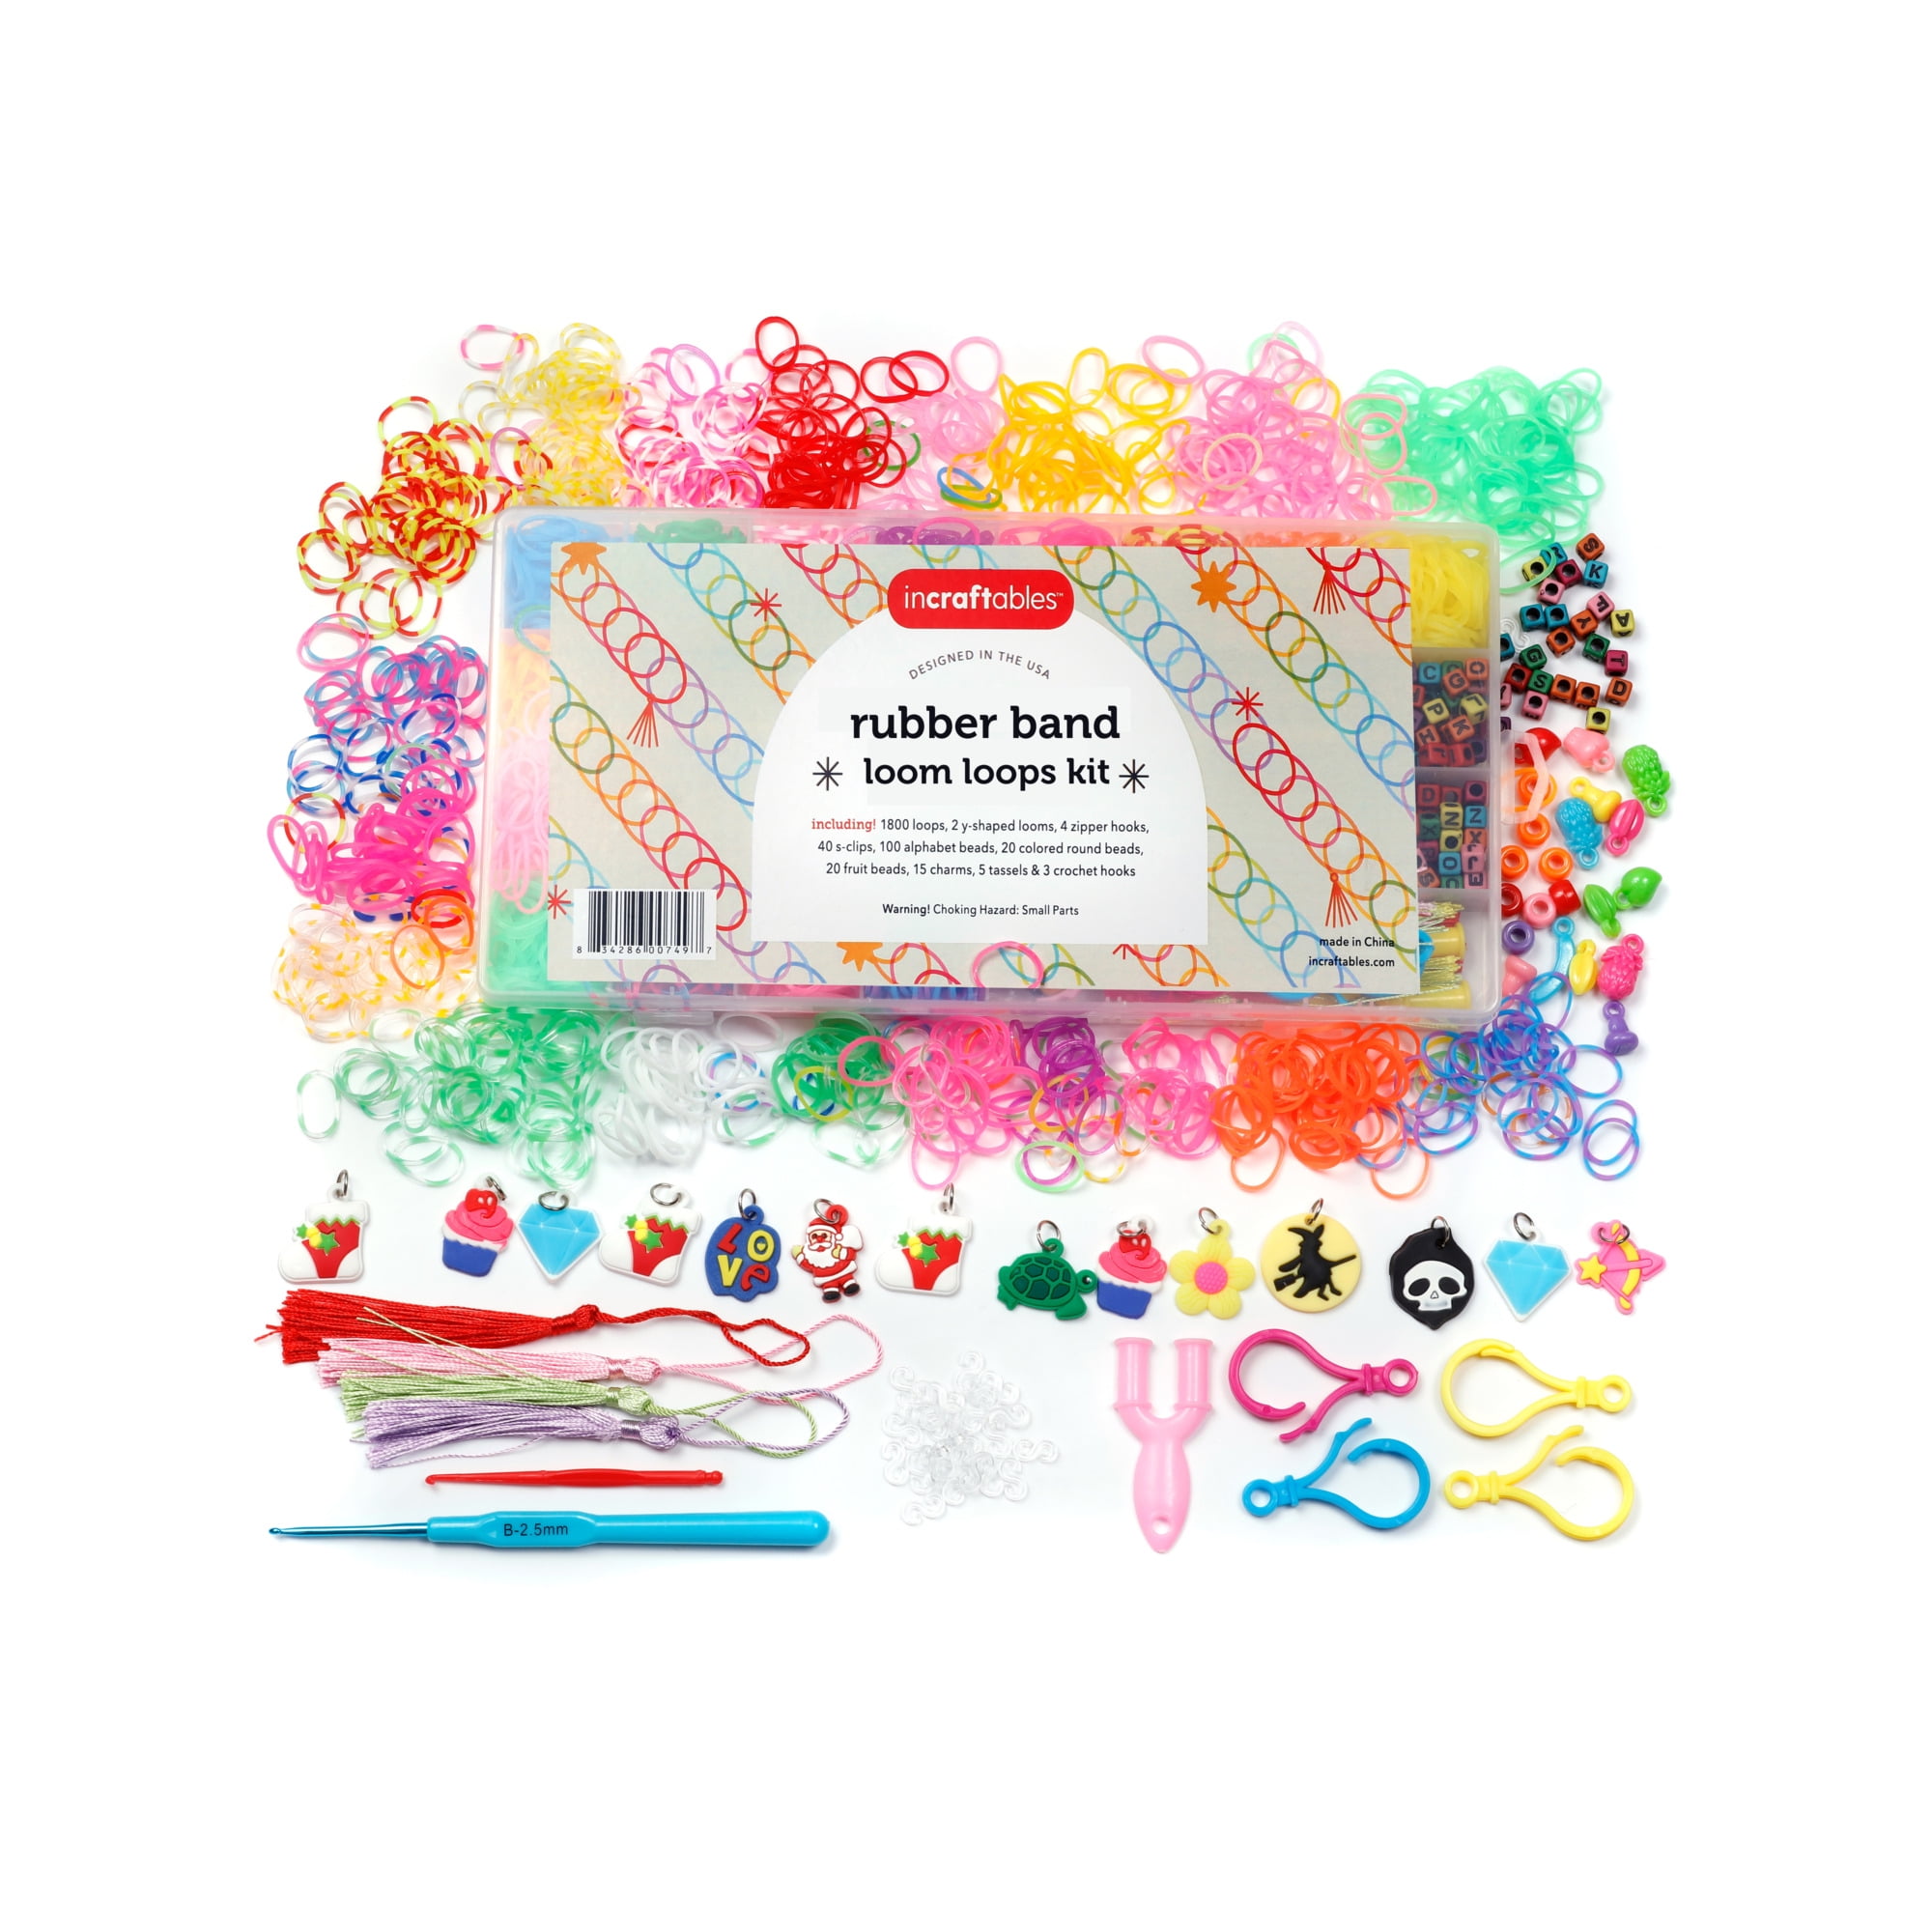 Incraftables Rubber Band Bracelet Making Kit. Multicolor Rainbow Rubberband  Set with Accessories